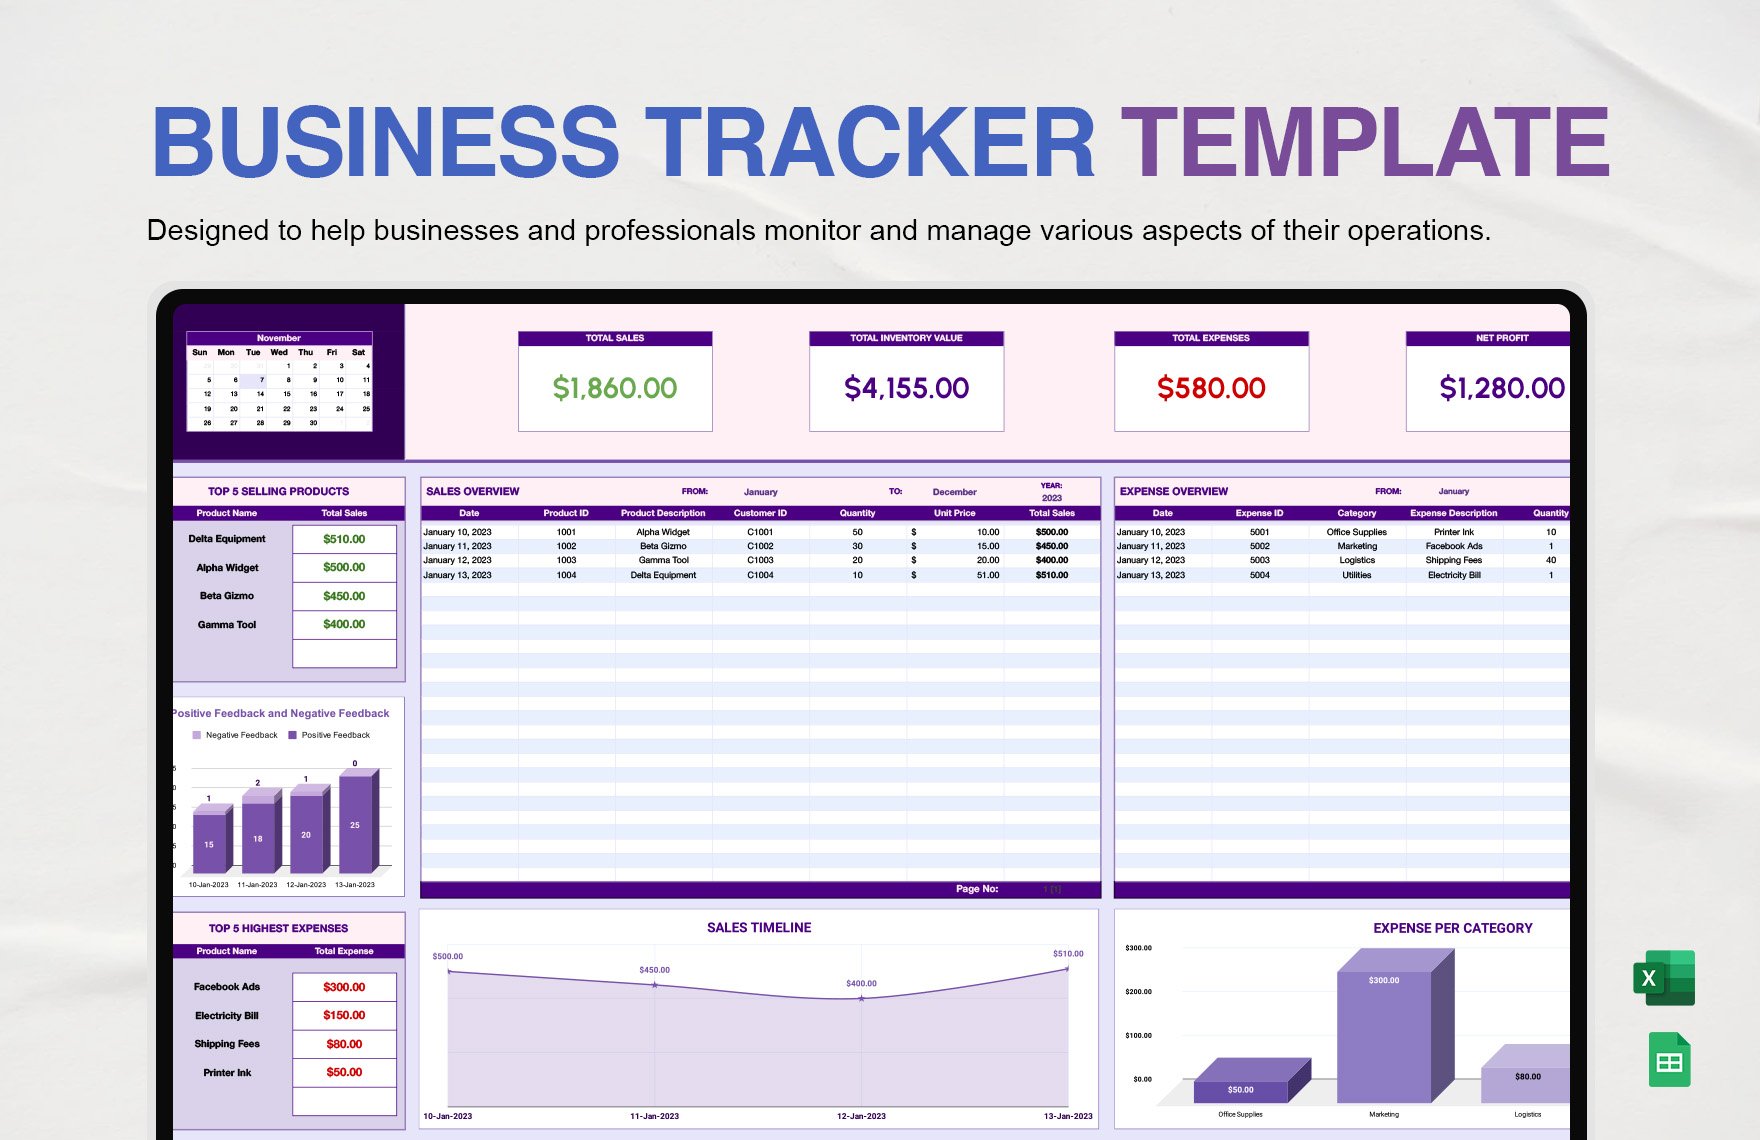 Business Tracker Template in Excel, Google Sheets